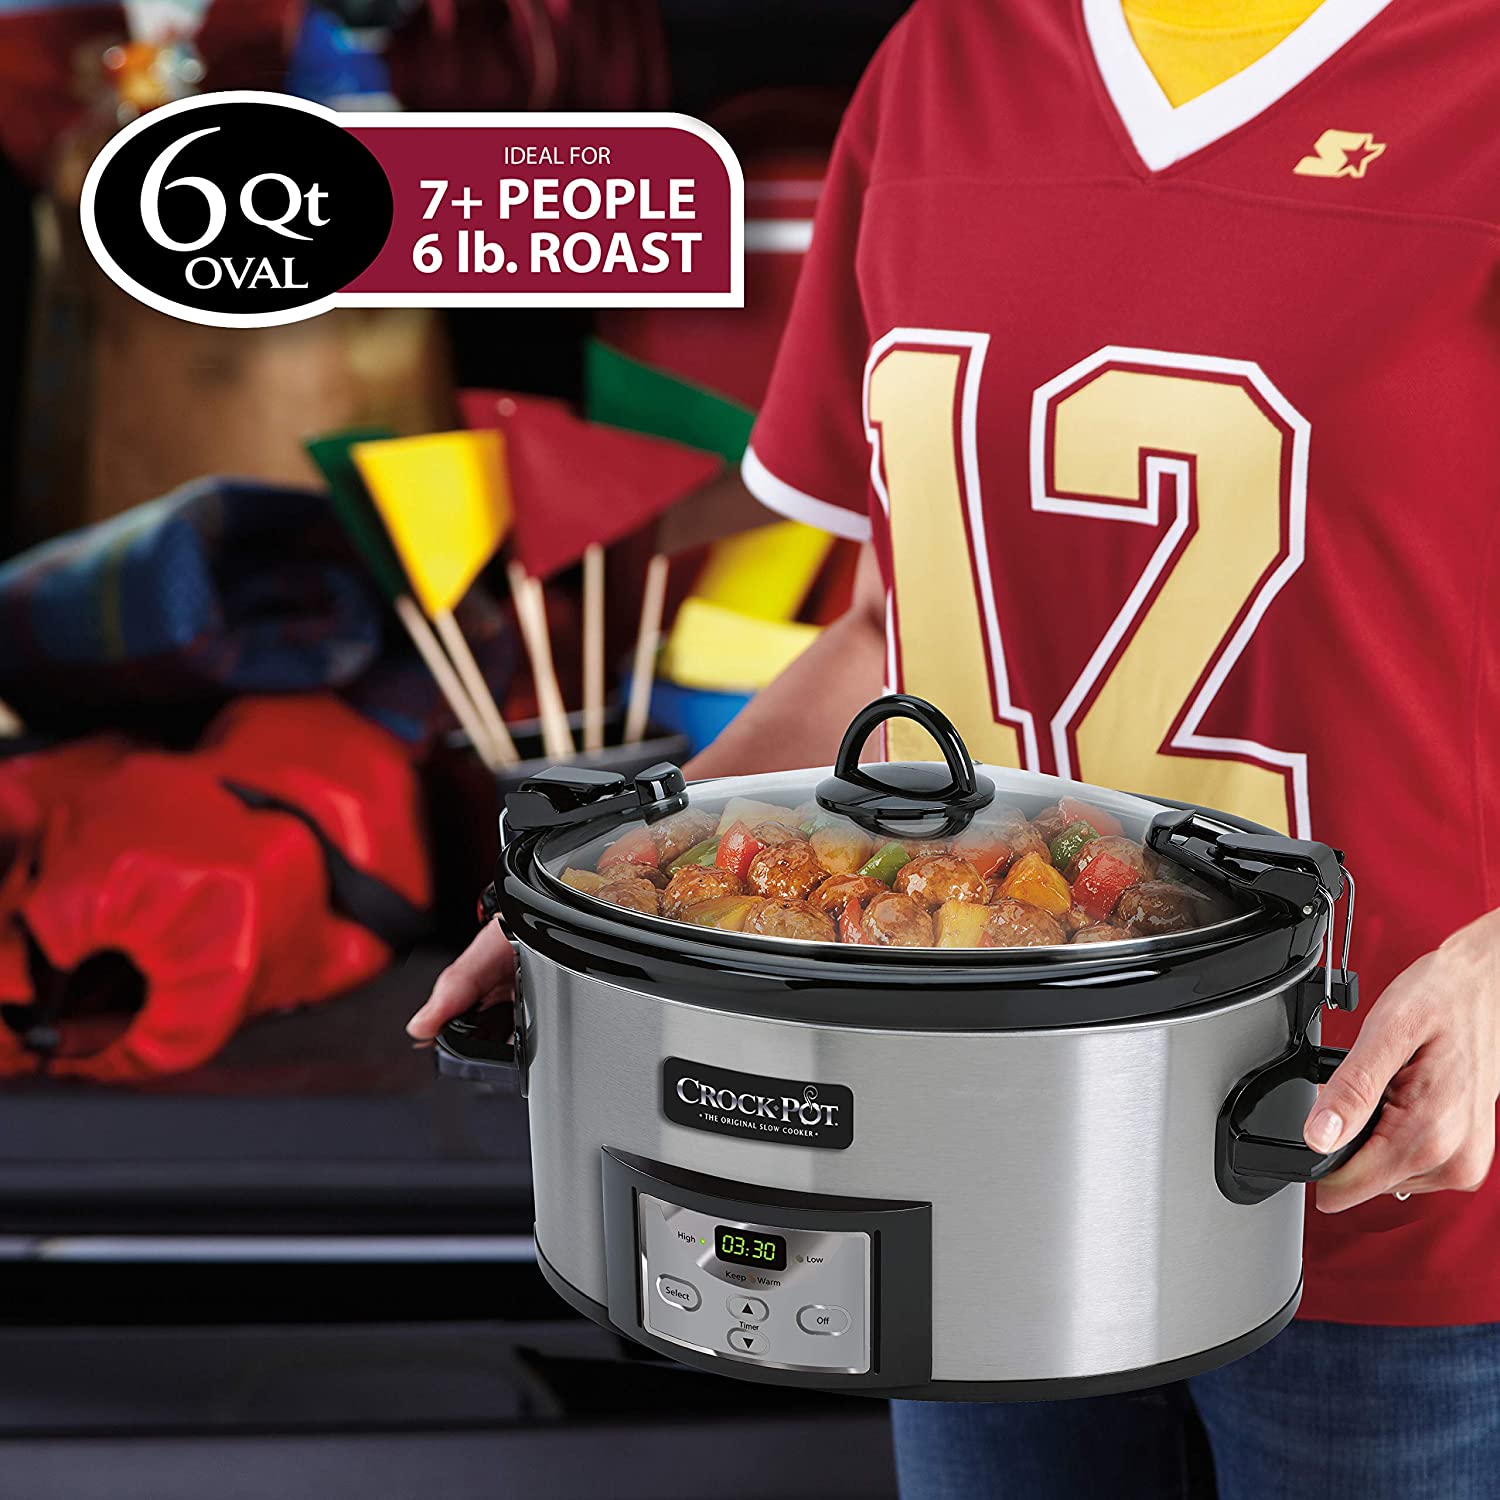 Crock-Pot 7-qt. Black and Stainless Steel Cook and Carry Digital